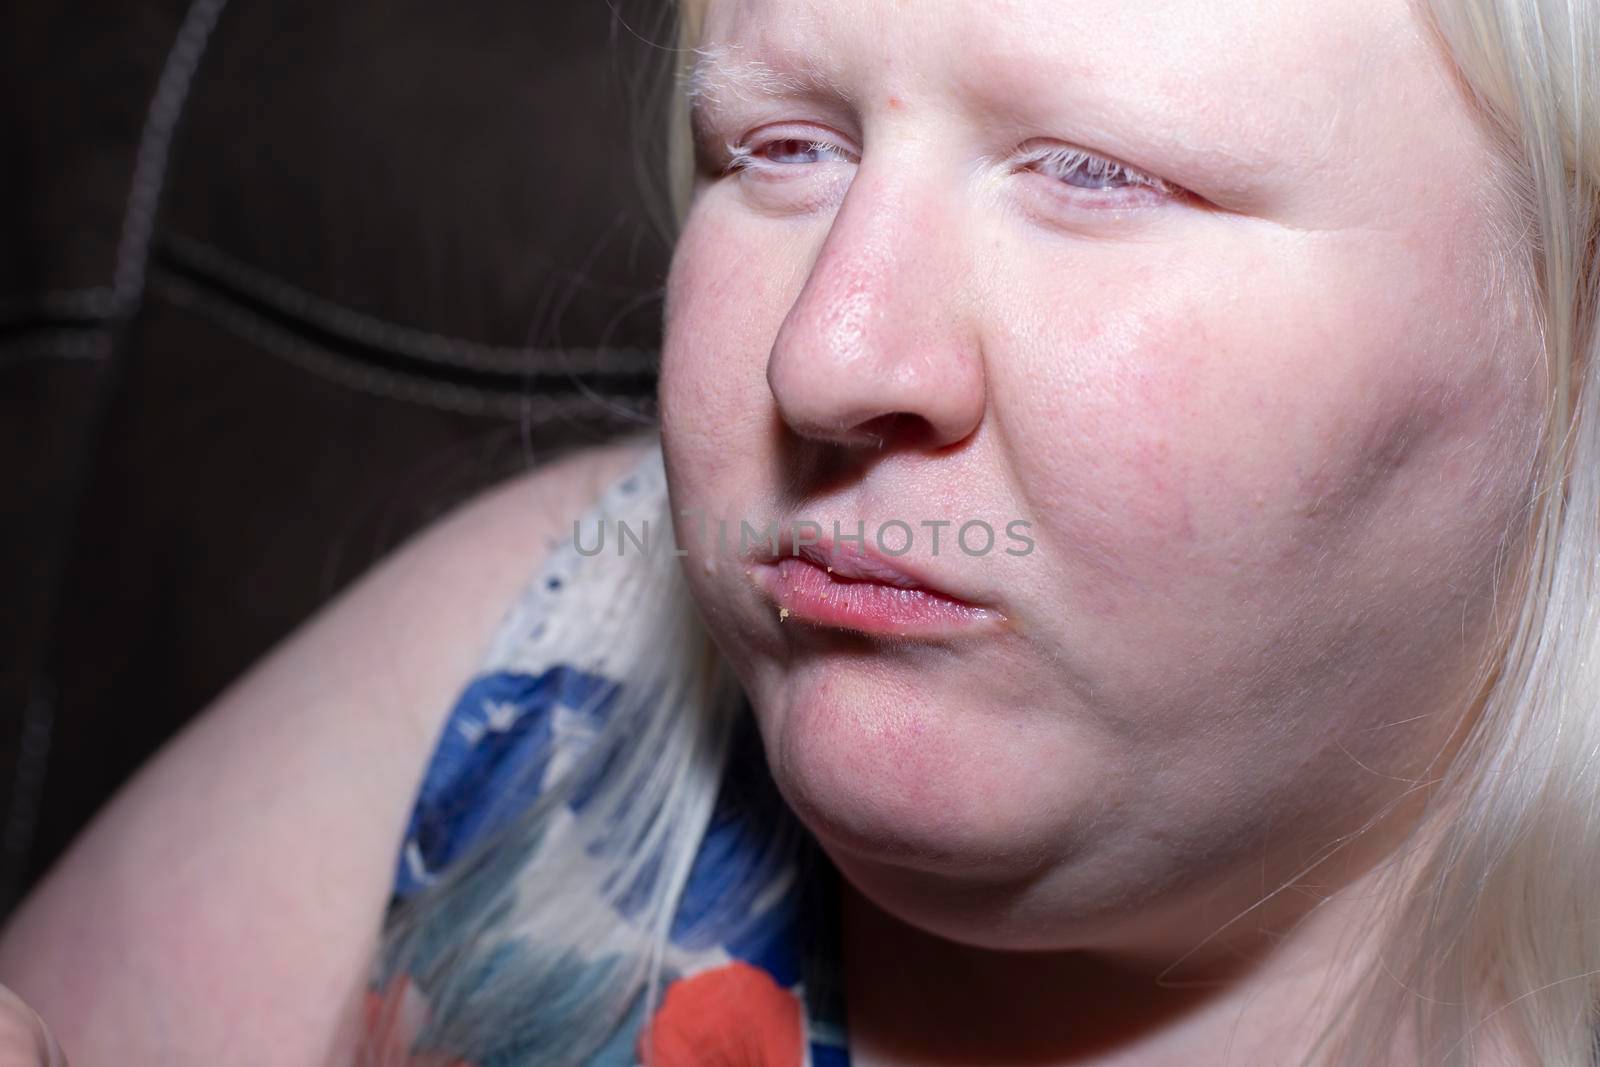 Obese, albino woman with crumbs on her lips